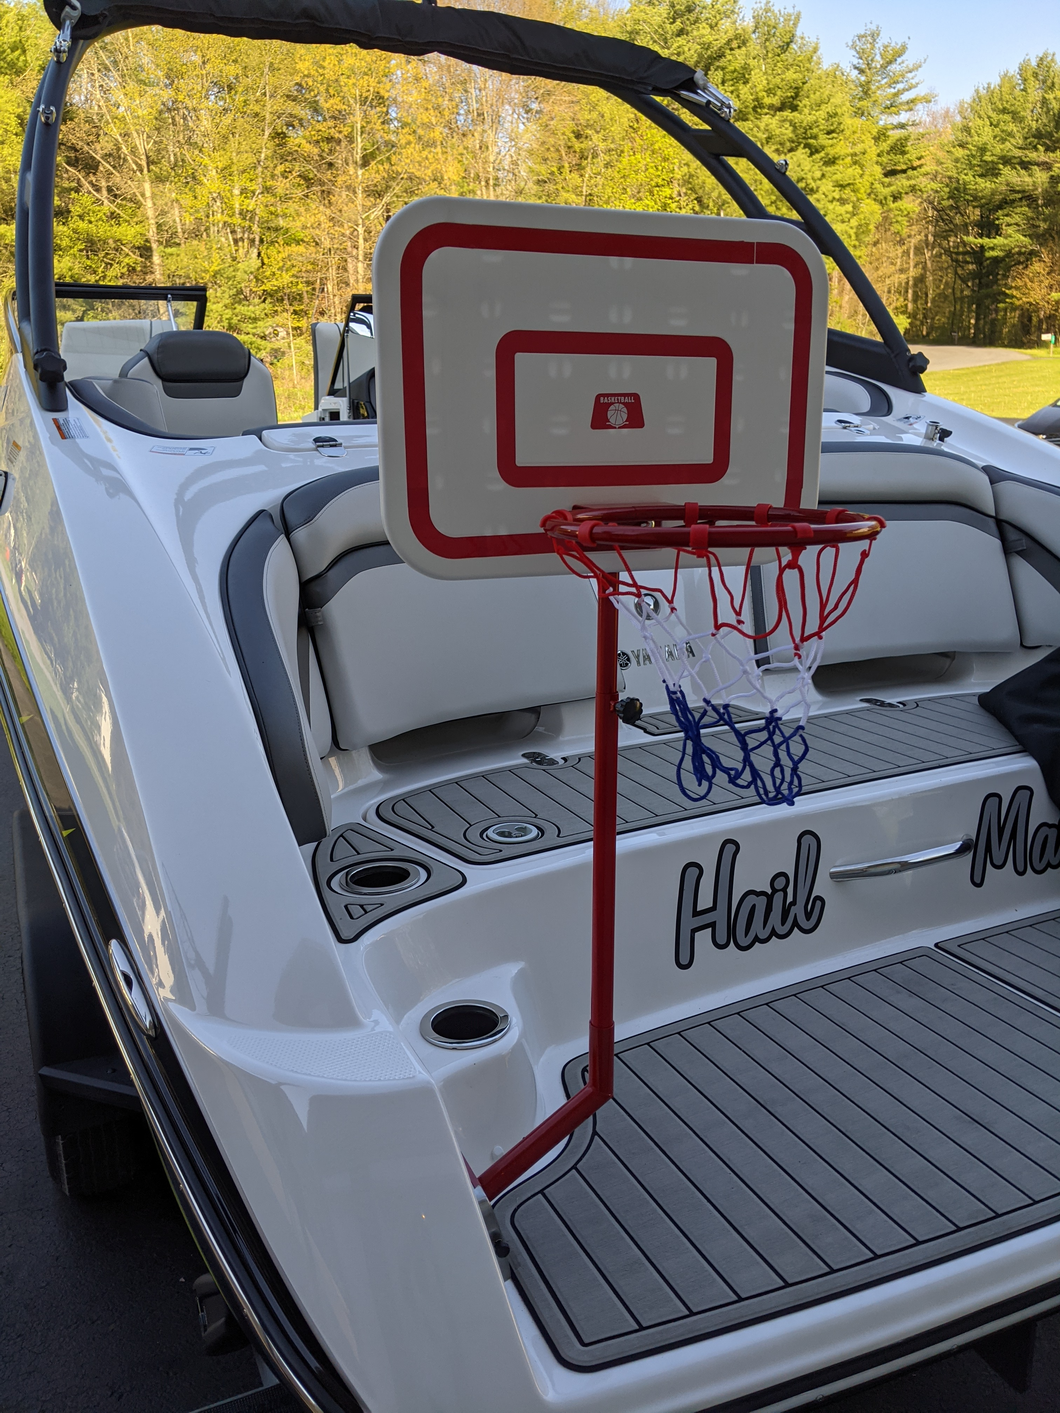 JEWLS Stainless Swimdeck Basketball Hoop Kit - Fits Chaparral